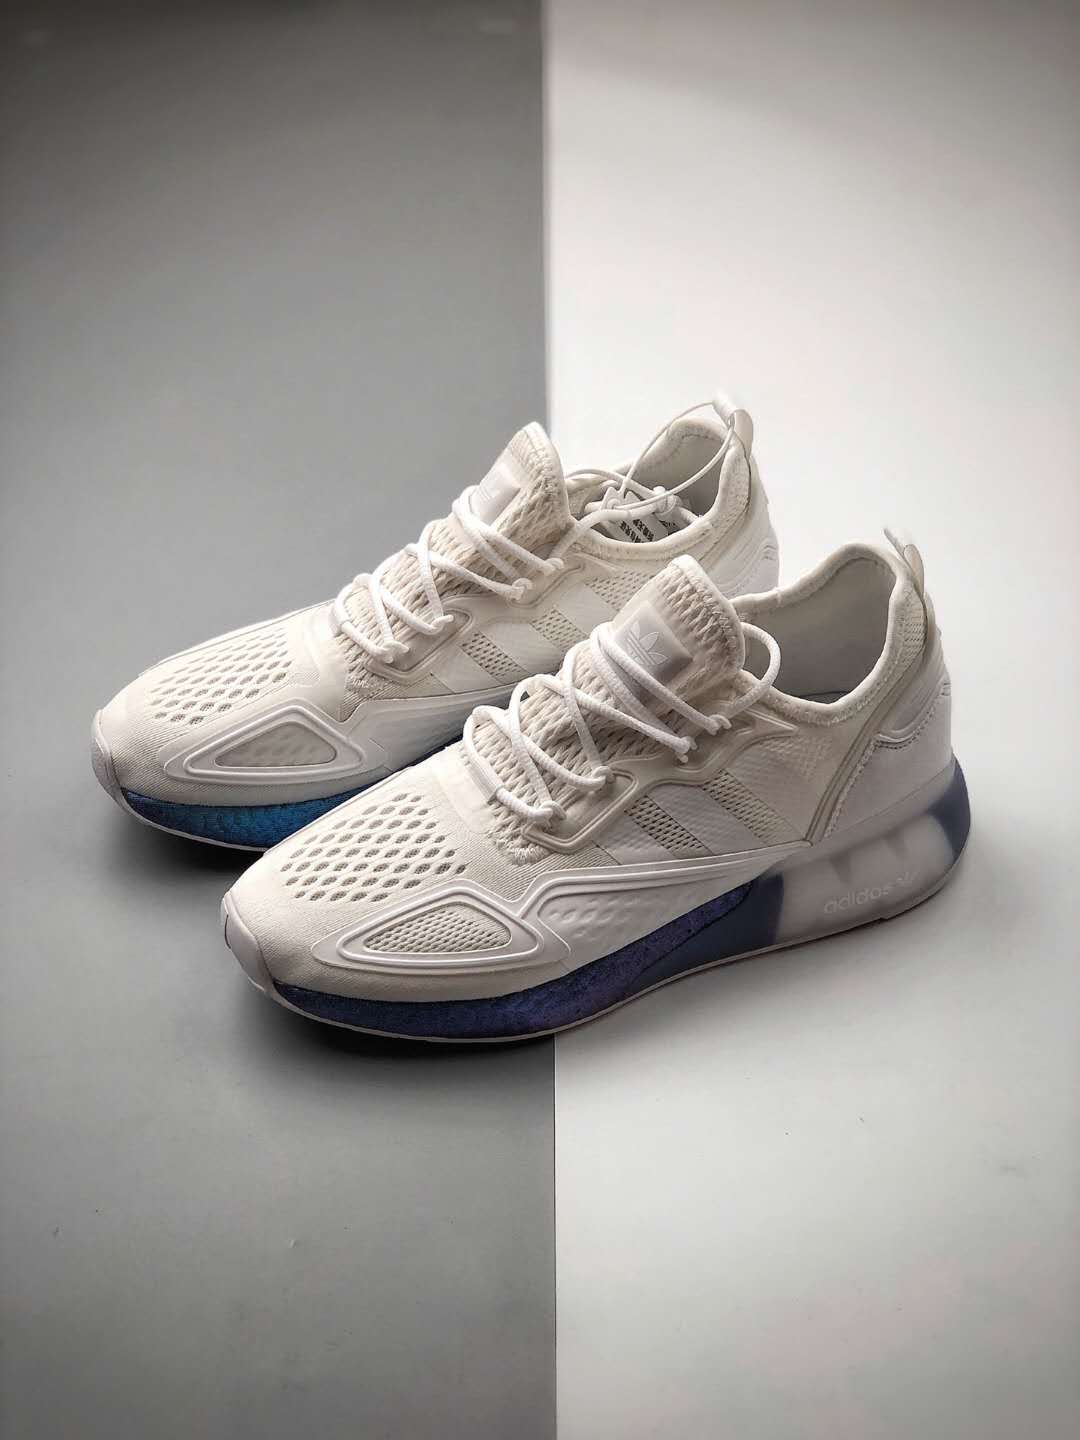 Adidas ZX 2K Boost 'White Boost Blue Violet' FV2928 - Stylish and Comfortable Trainers